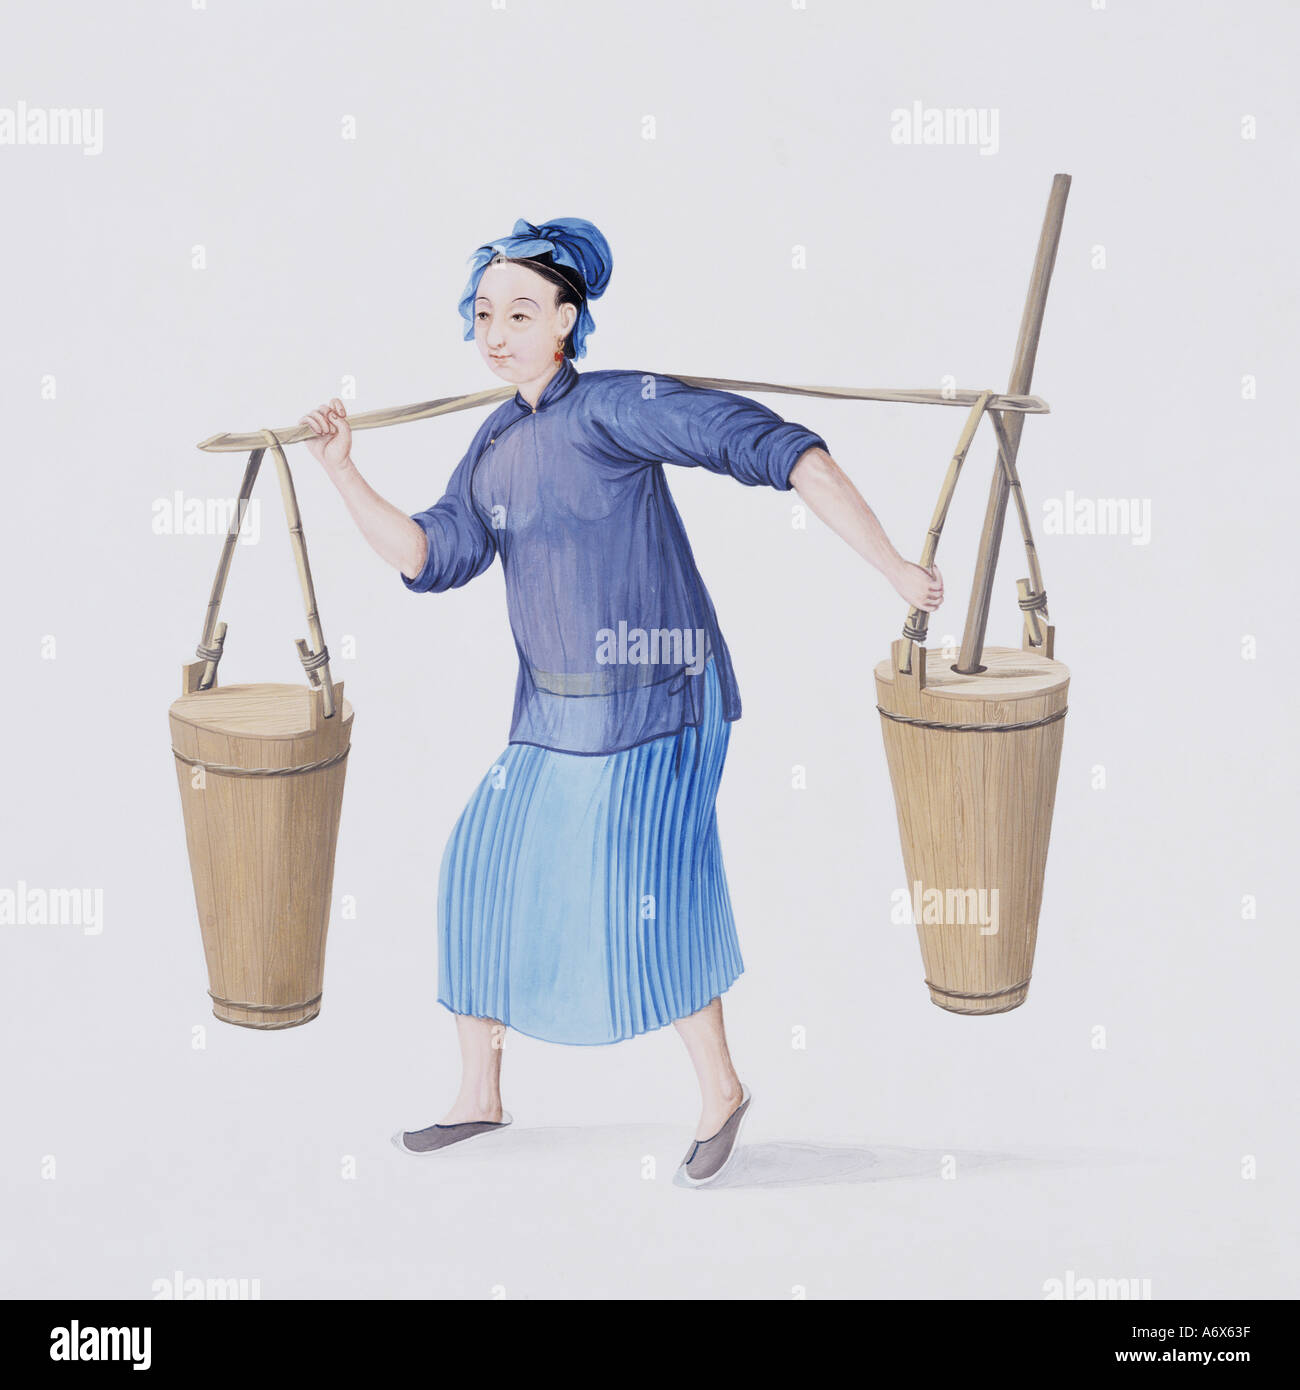 https://c8.alamy.com/comp/A6X63F/manure-collector-or-woman-carrying-dirt-by-puqua-china-late-18th-century-A6X63F.jpg